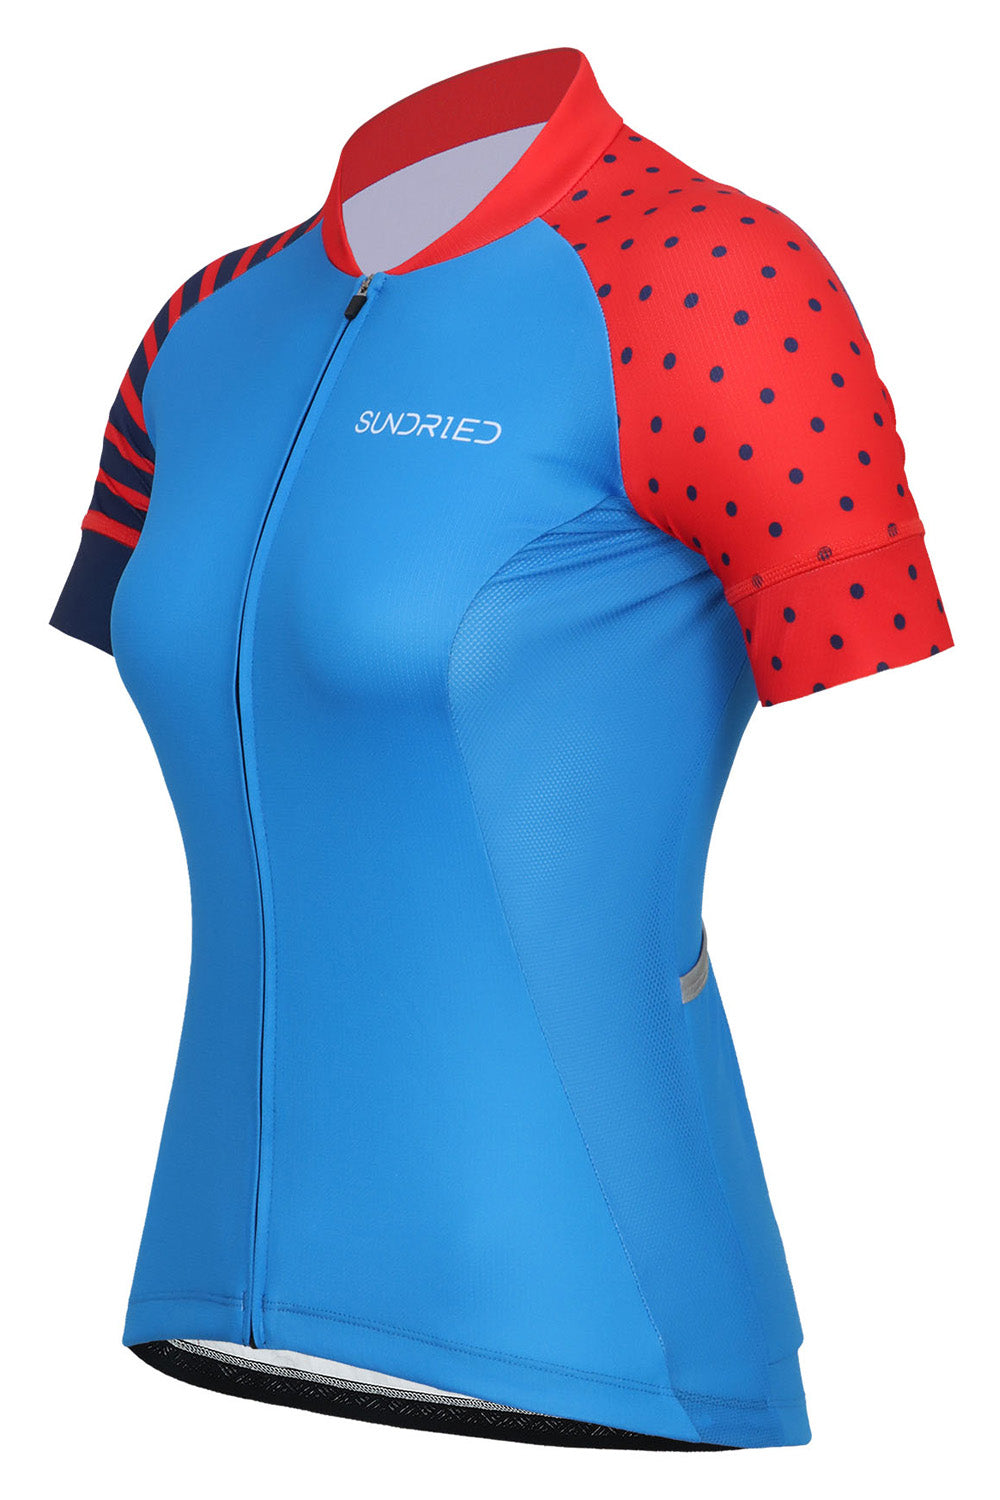 Sundried Spots and Stripes Women's Short Sleeve Cycle Jersey Short Sleeve Jersey Activewear